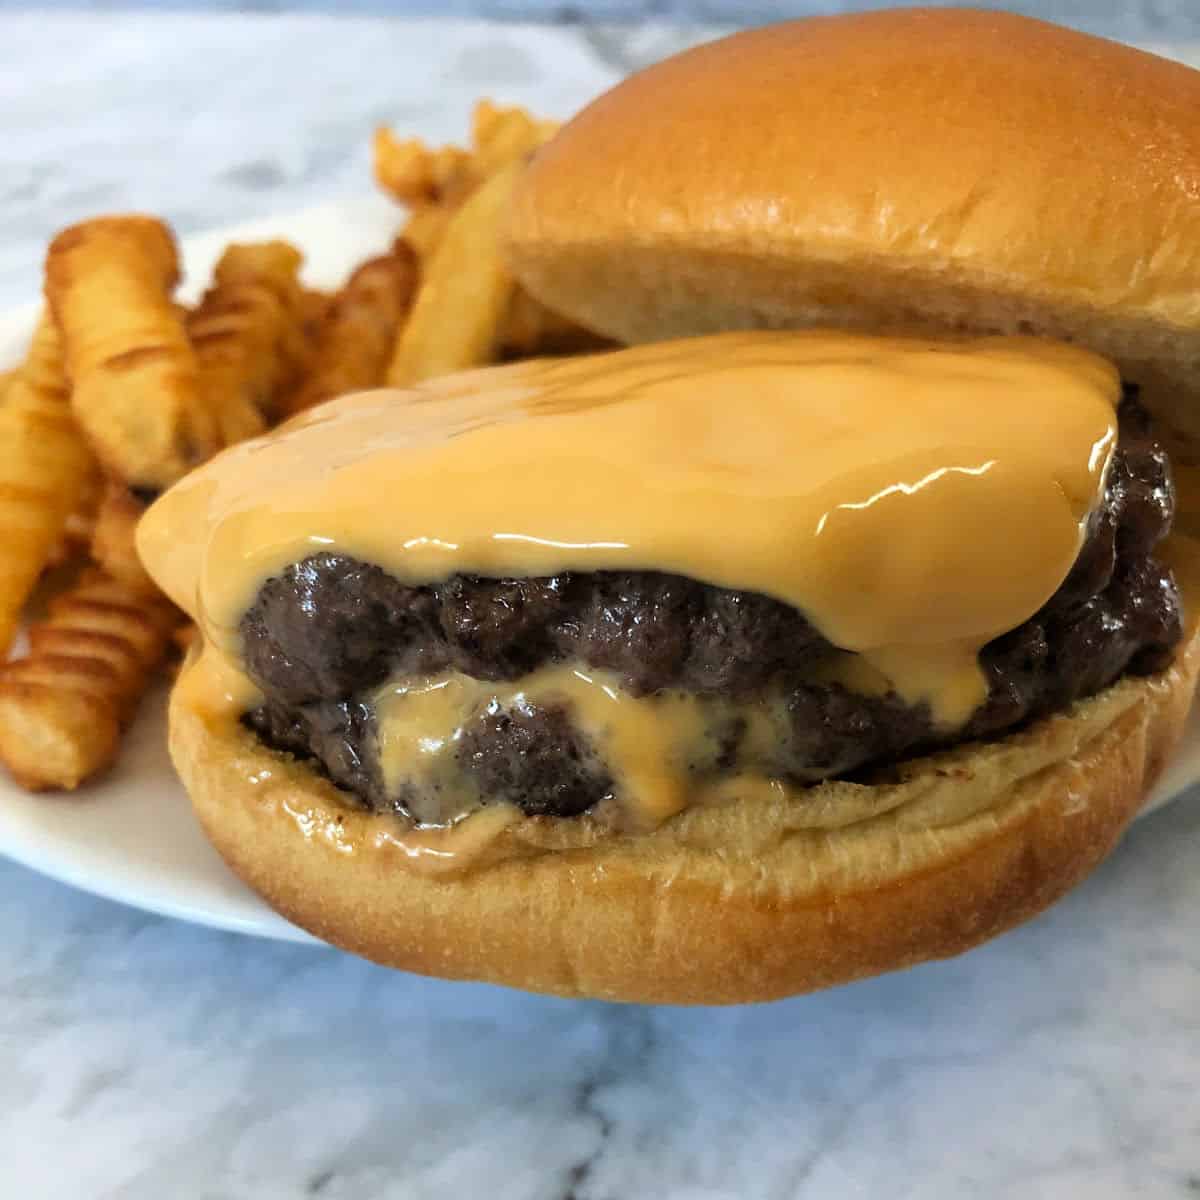 Cheese juicy and Juicy Lucy